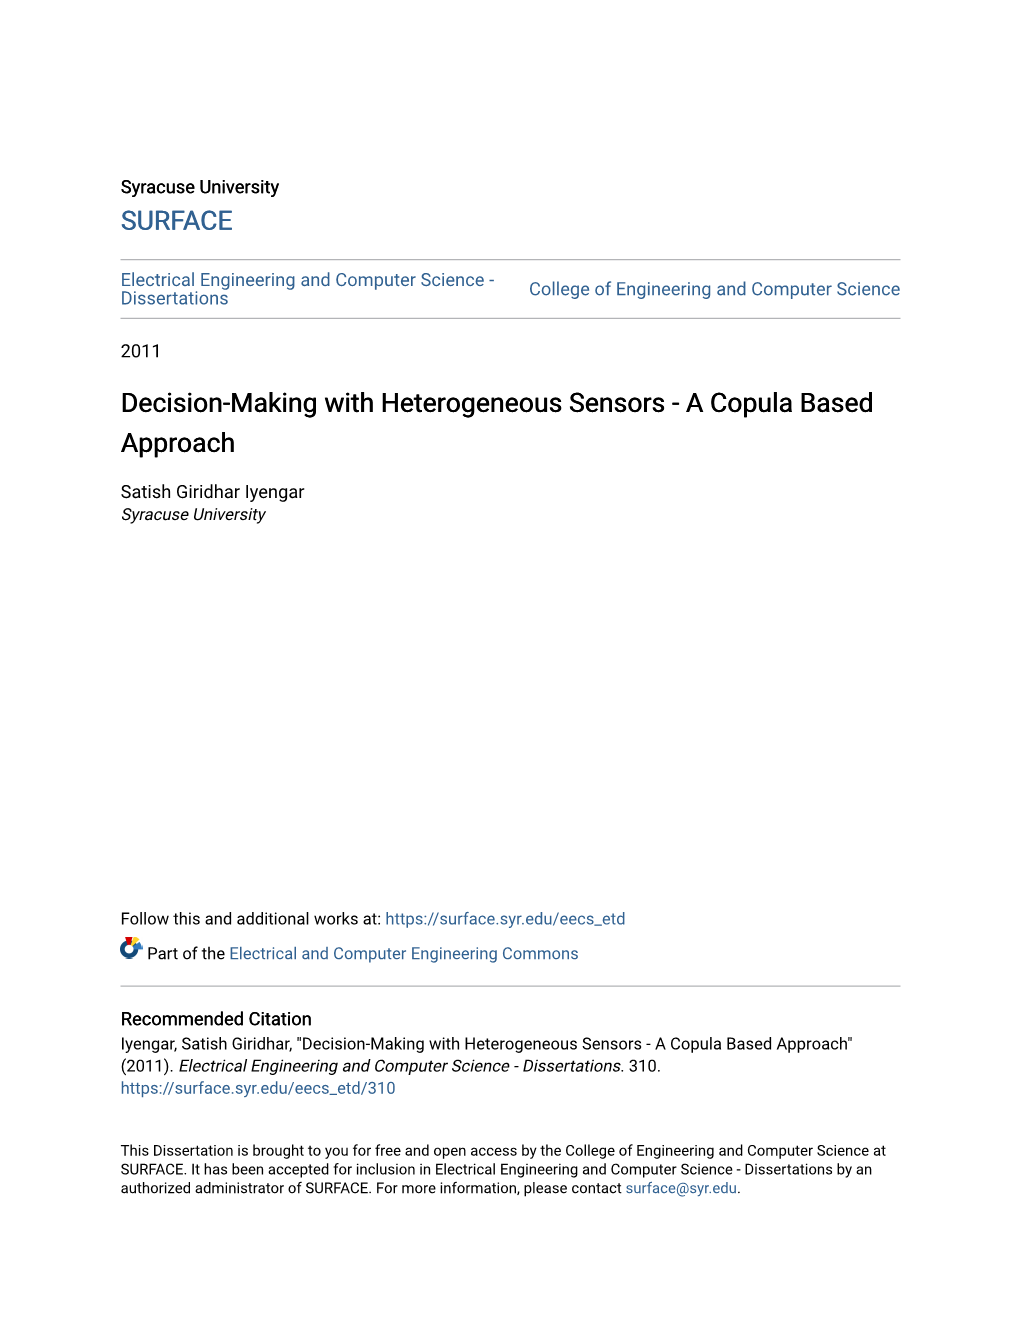 Decision-Making with Heterogeneous Sensors - a Copula Based Approach